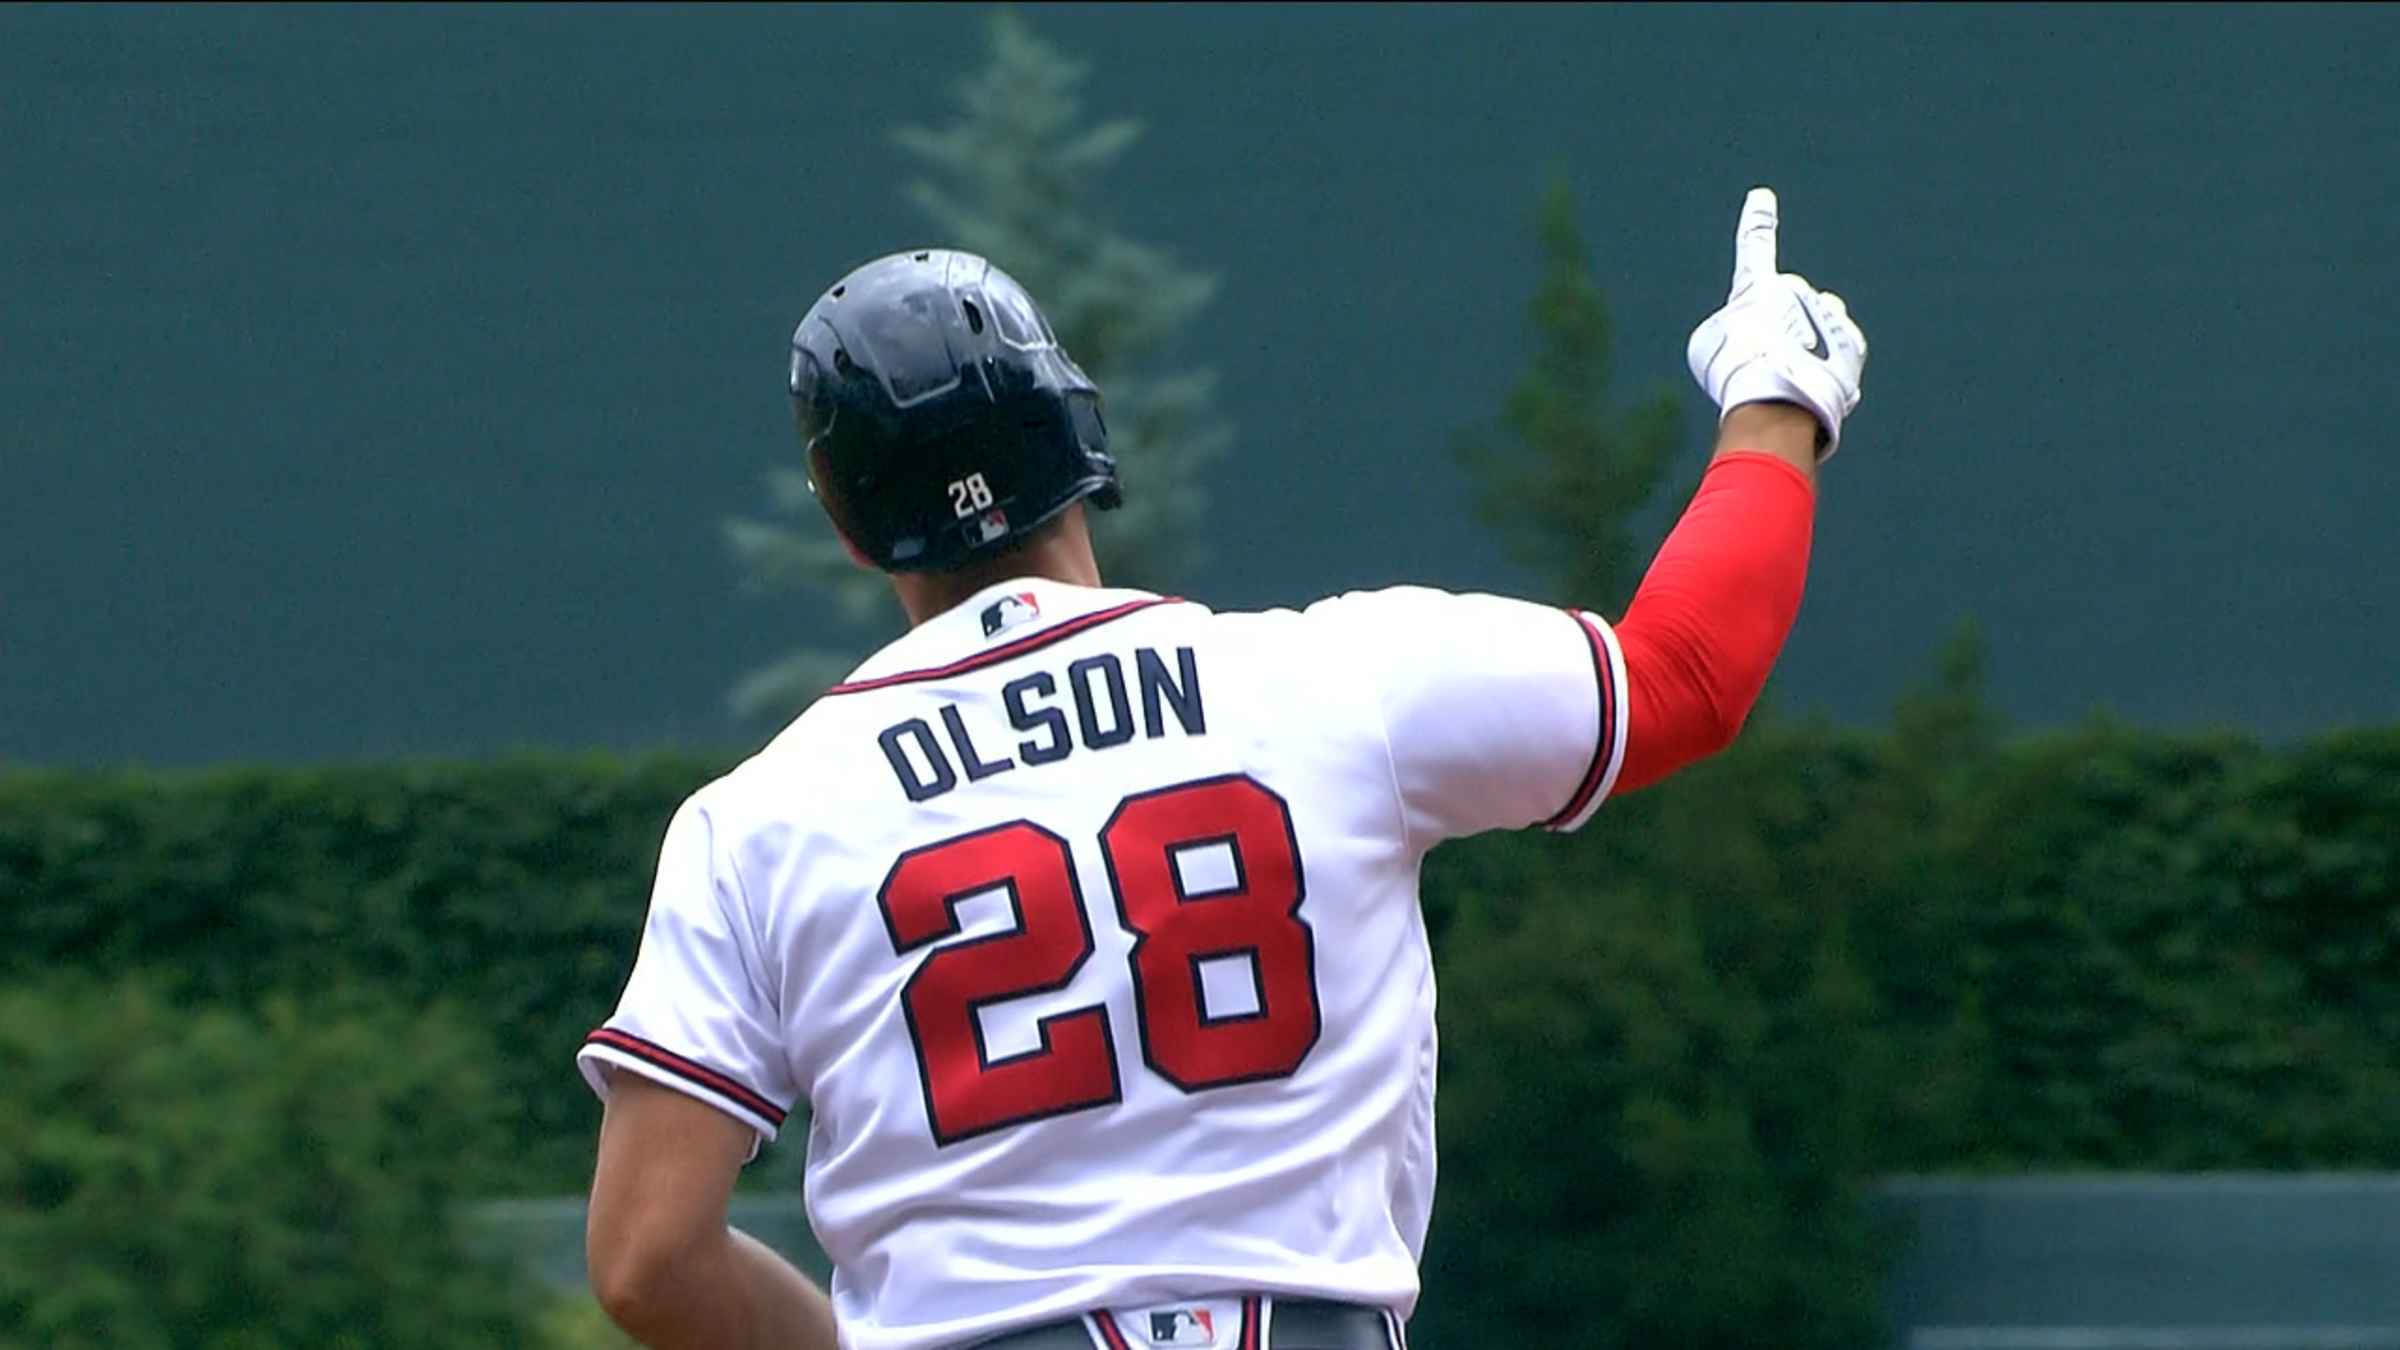 Matt Olson is on pace for some crazy numbers. How many homers do